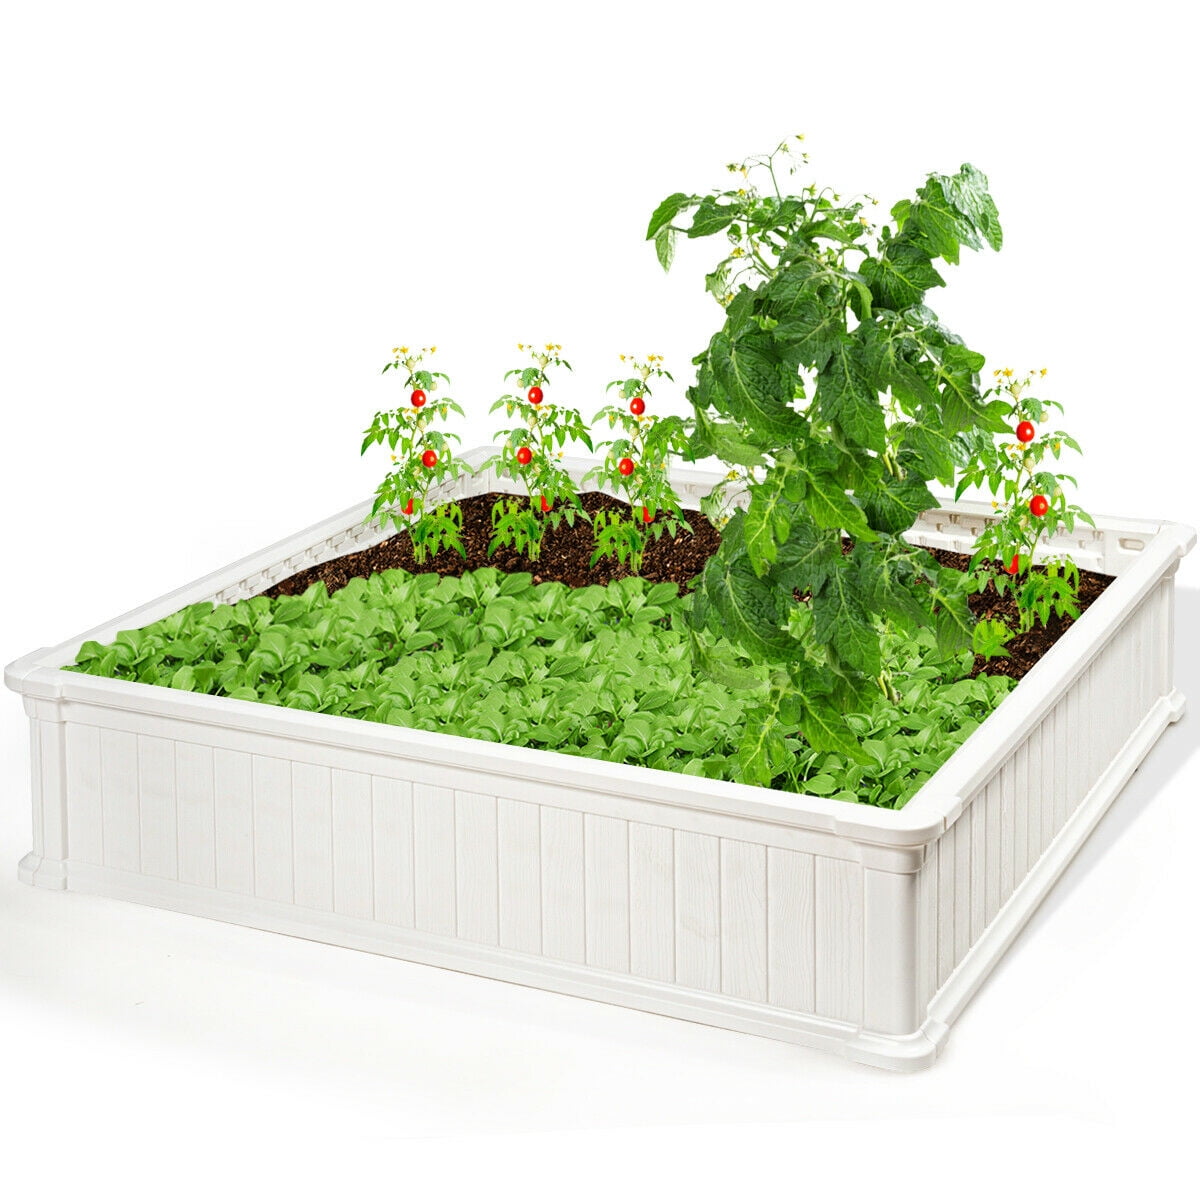 Lonabr Raised Garden Bed Square Planter Box Plant Herb Flowers Tomato Outdoor 